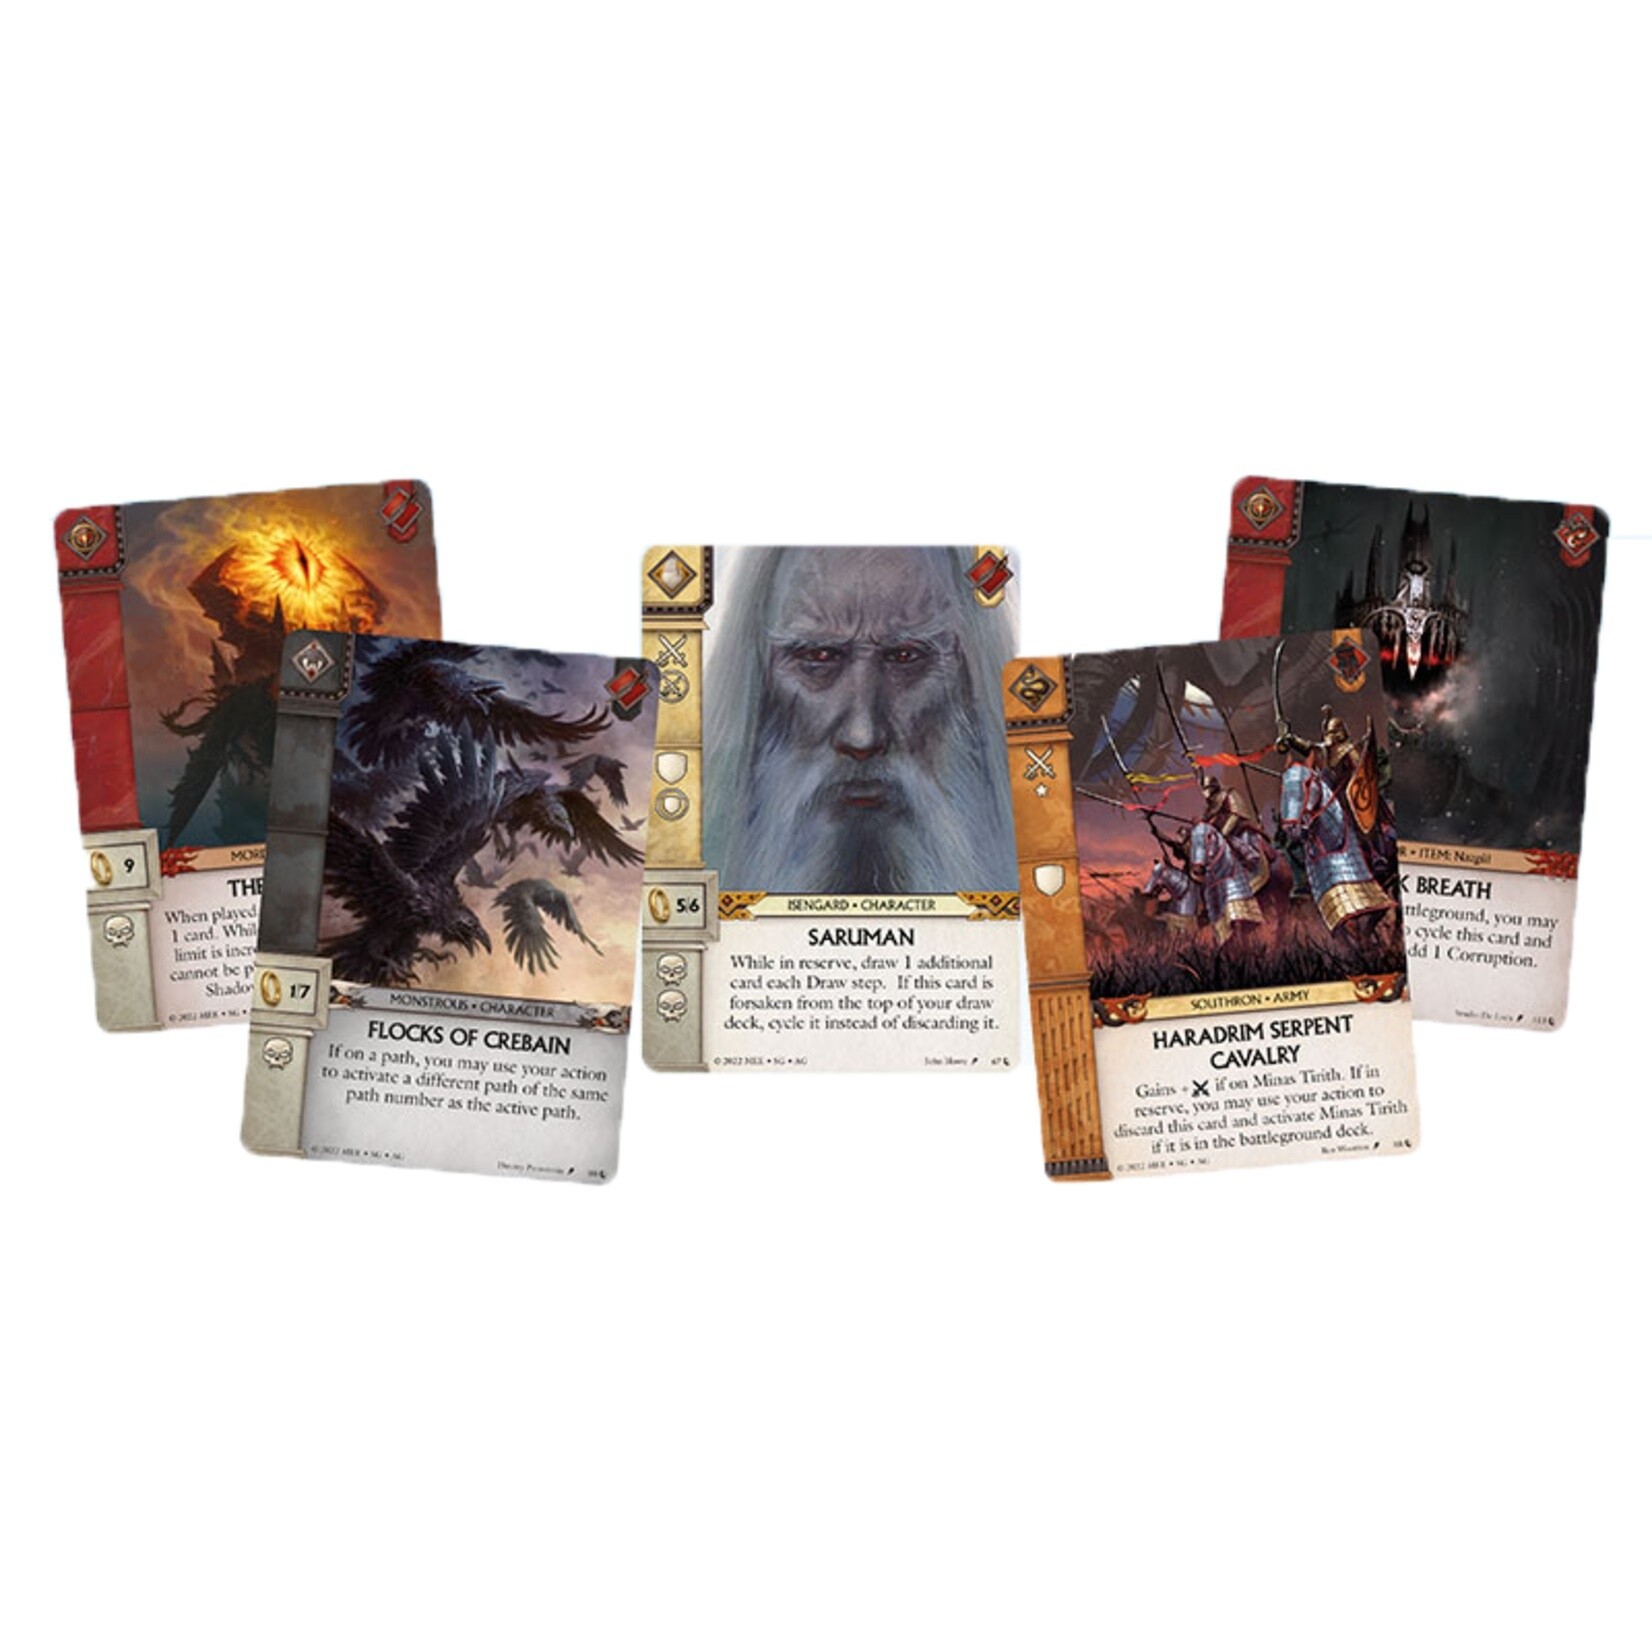 Ares Games SRL War of the Ring: The Card Game